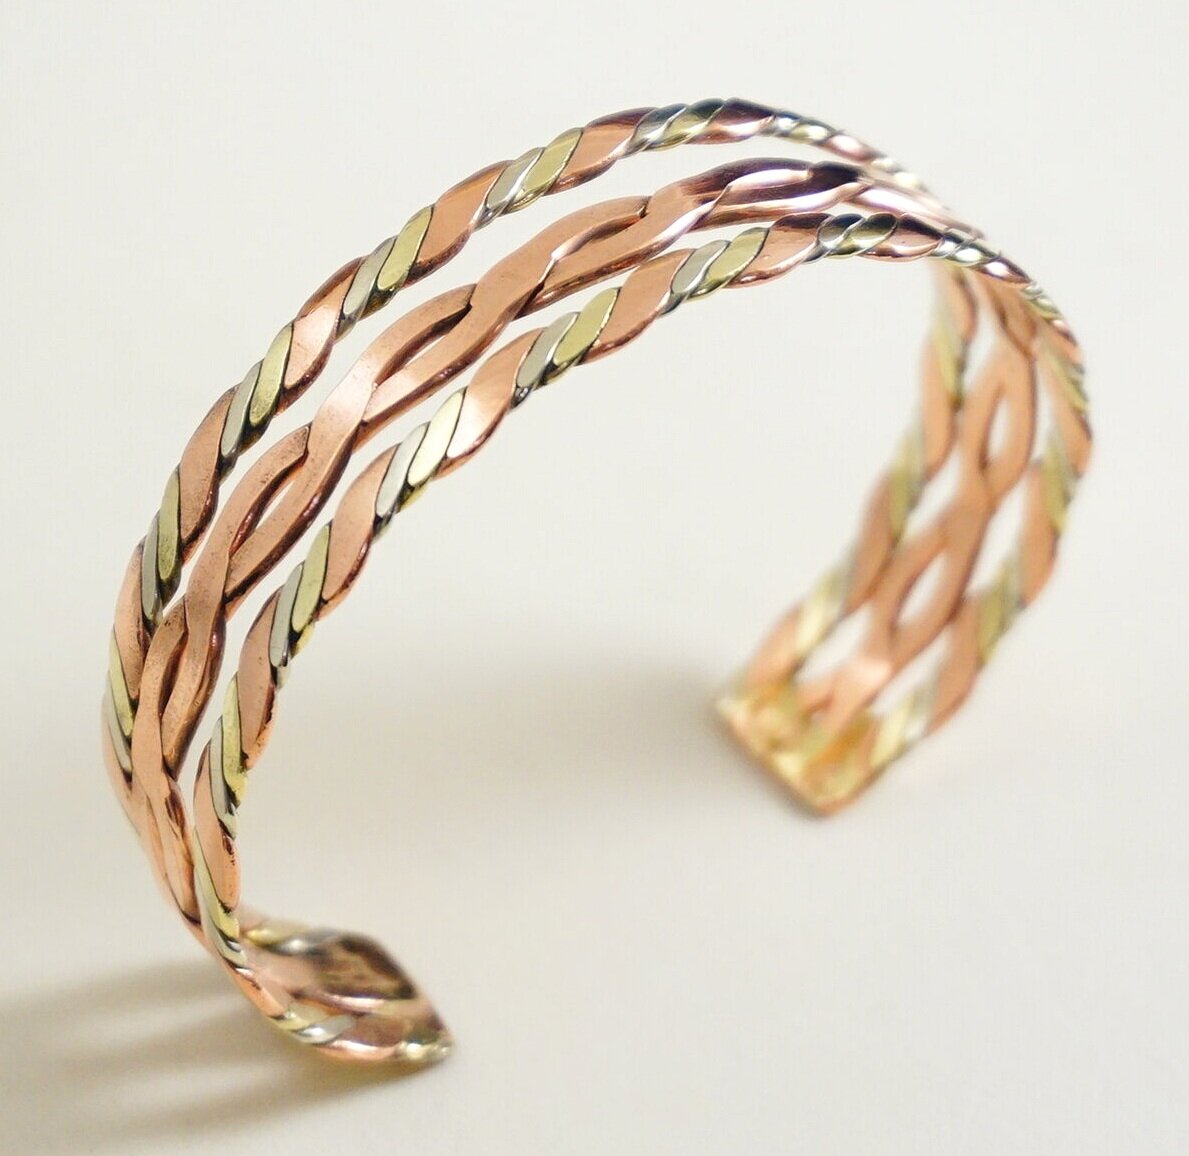 Long Solid Thick Round Indian 3-color Copper Delicately Braided Cuff Bracelet 